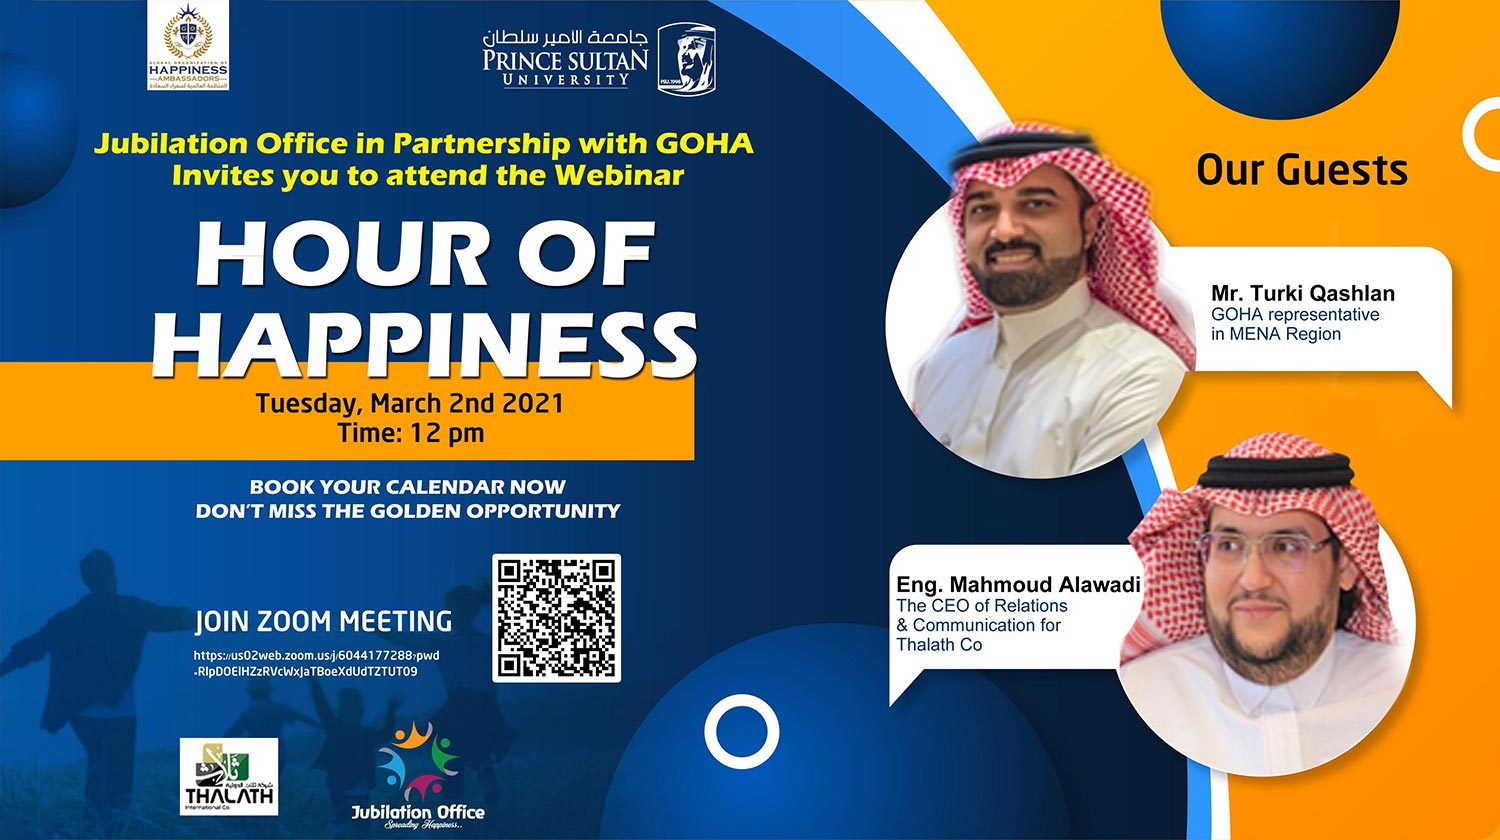 Event in Collaboration with GOHA (Global Organization of Happiness Ambassadors)